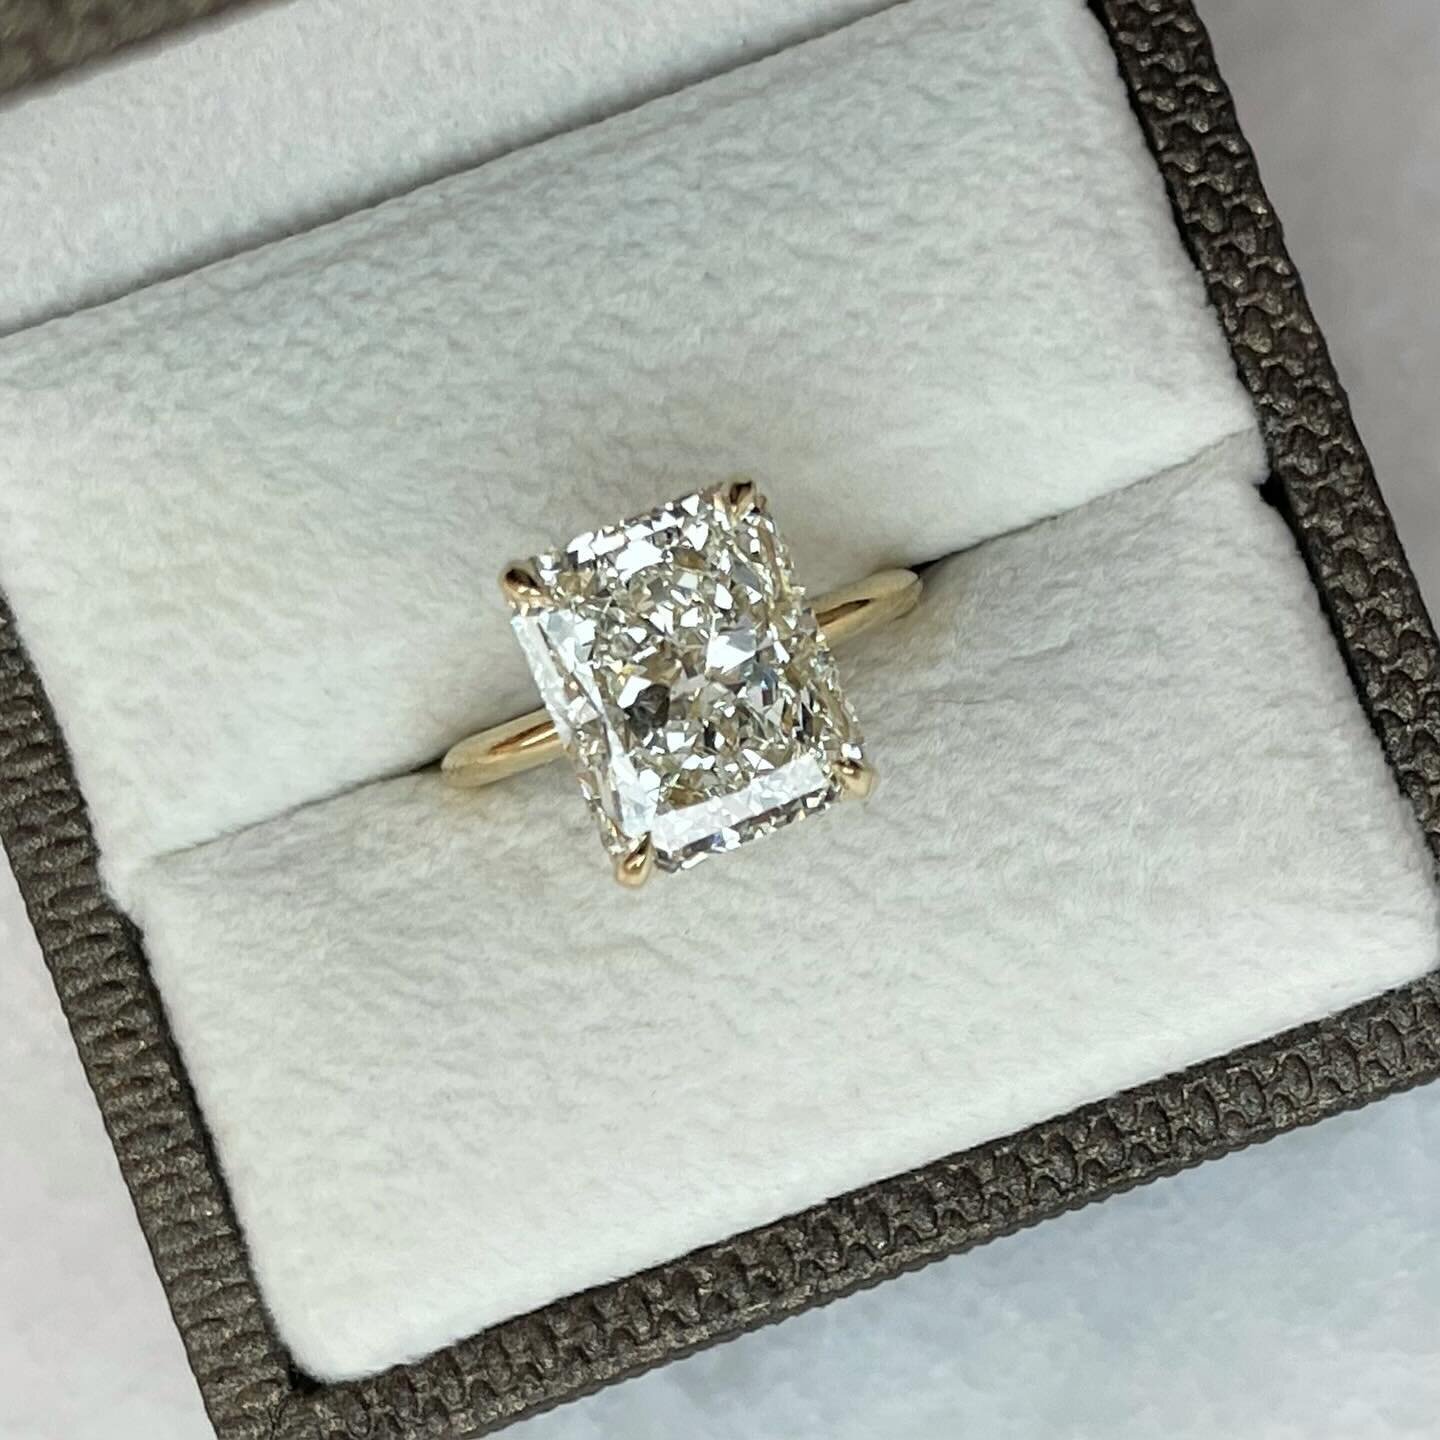 Hidden Halo ~ extra sparkle with diamond details in a classic solitaire.

5 carat, GIA certified, Natural Earth Mined Radiant Cut Diamond.  Custom design 18k yellow gold ring.